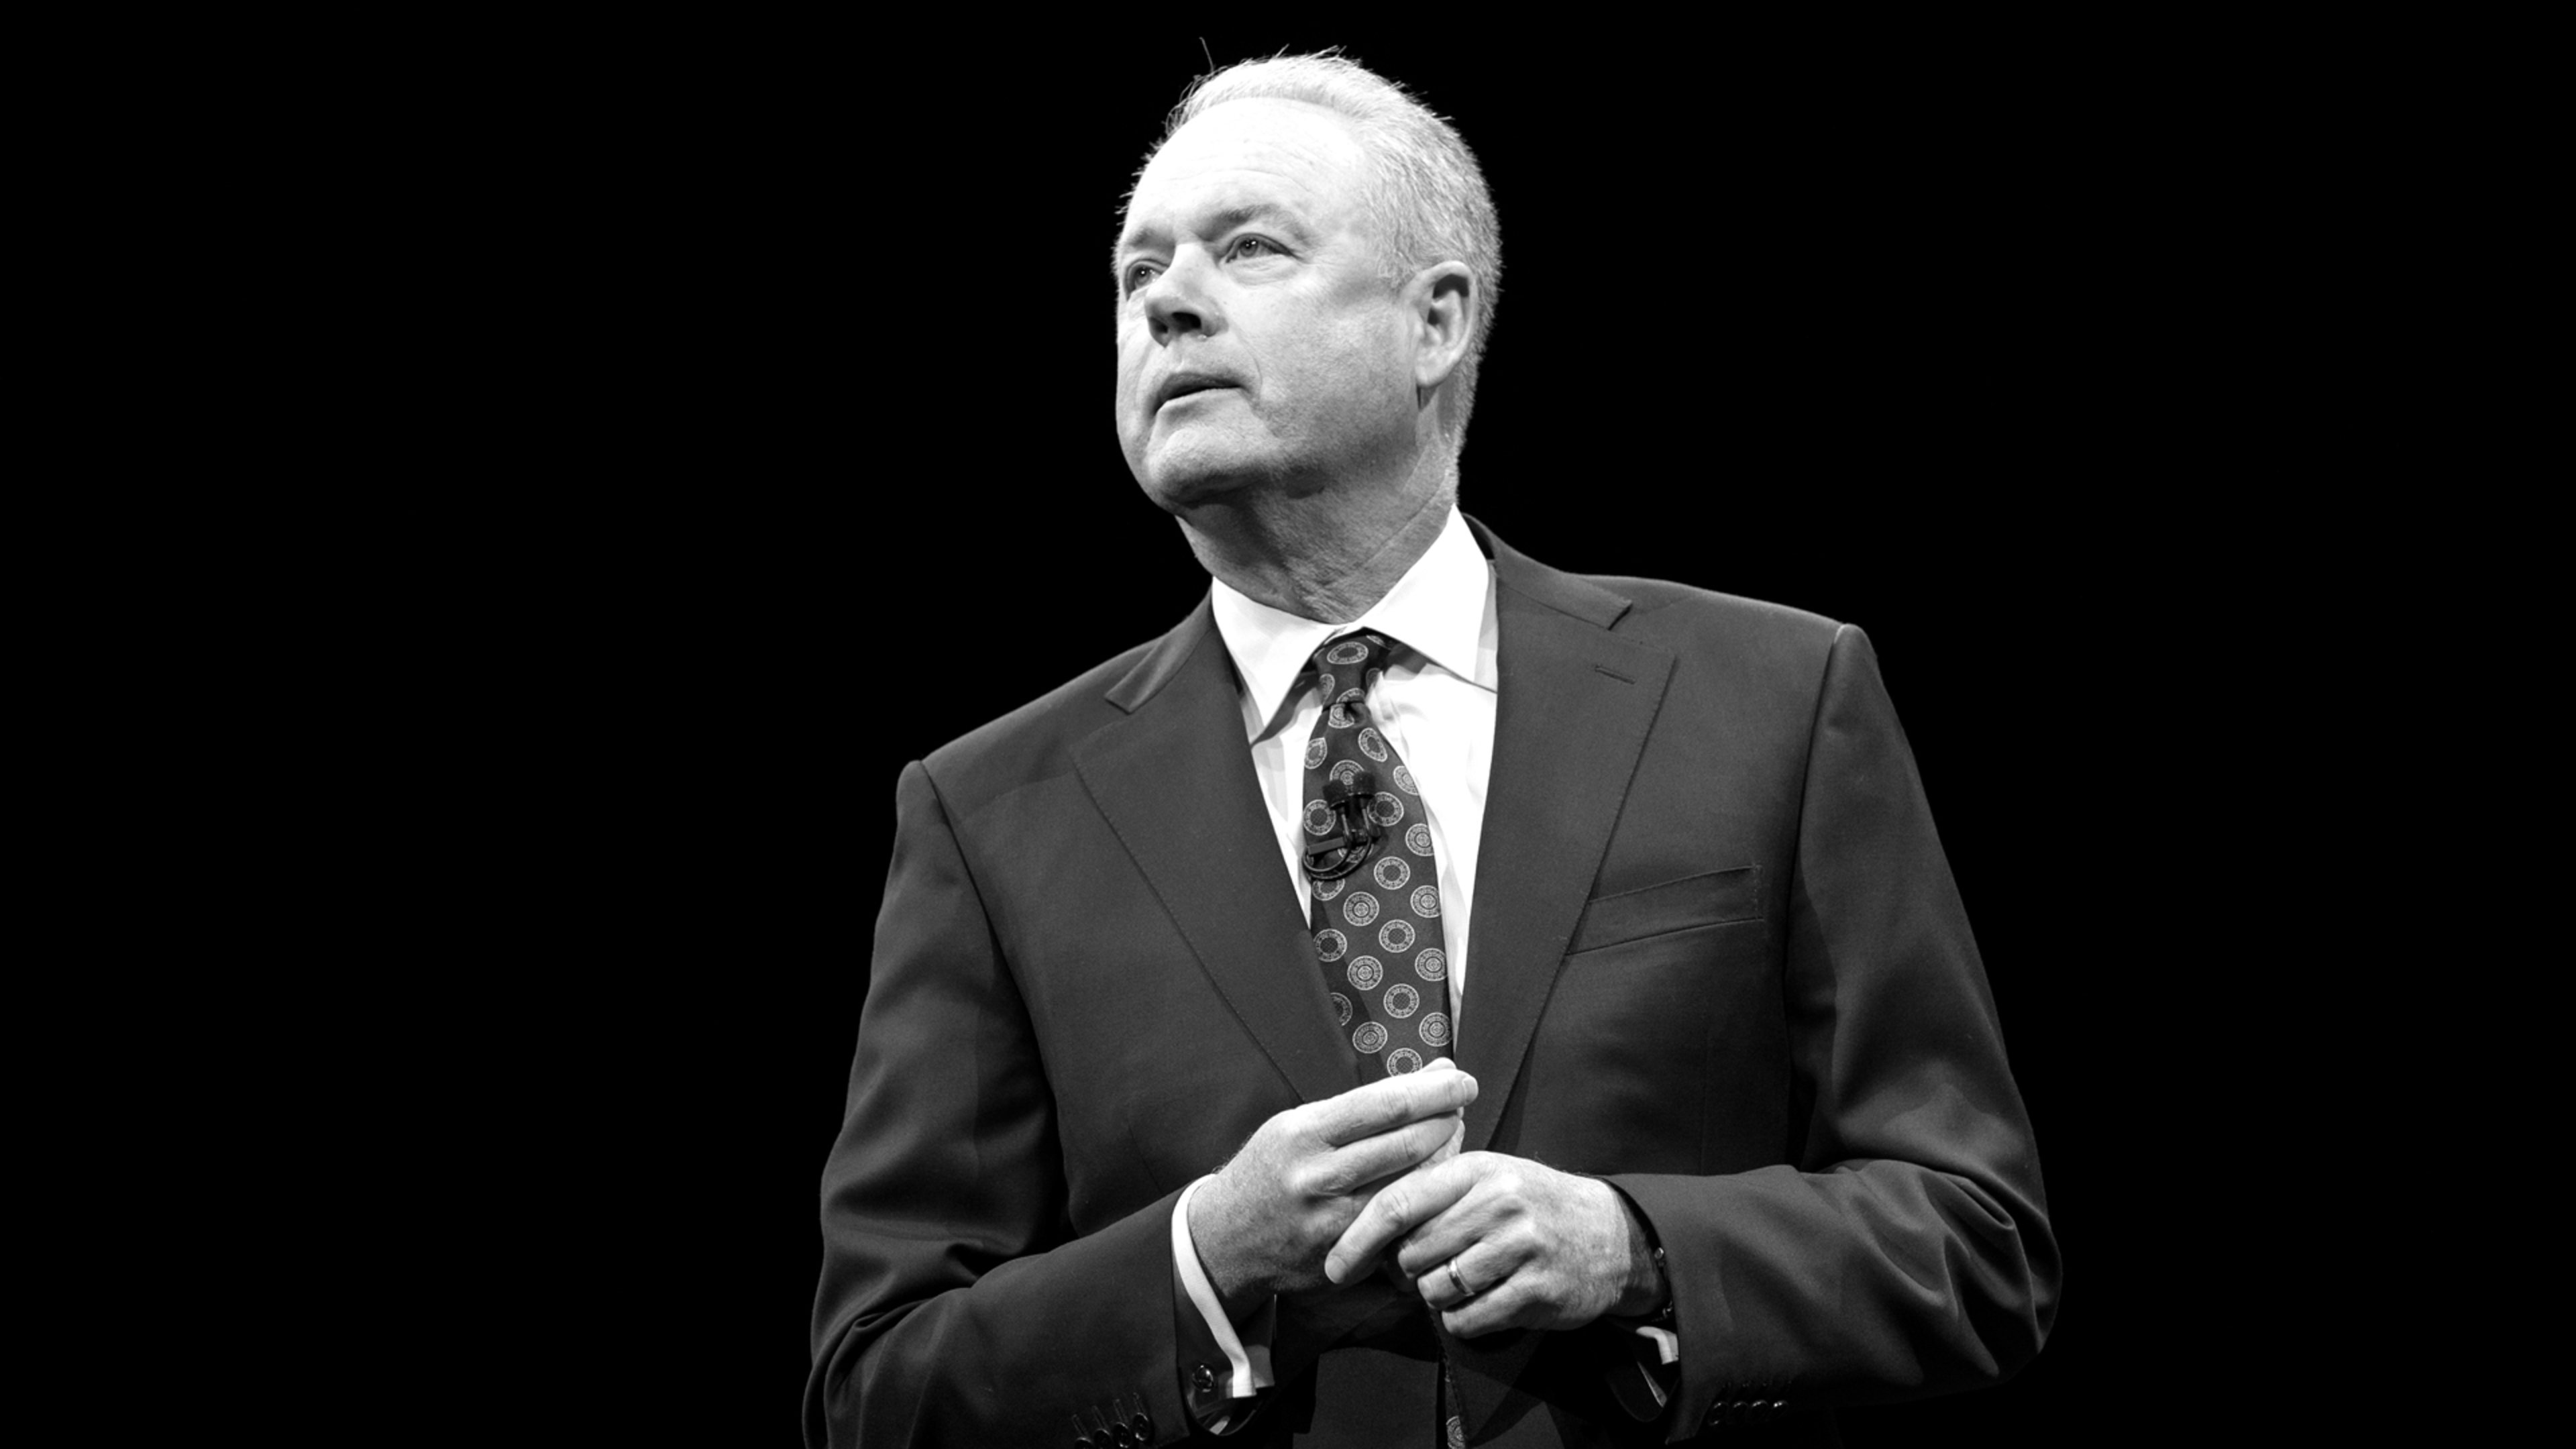 Watch: Starbucks CEO Kevin Johnson On Innovation And Empathy